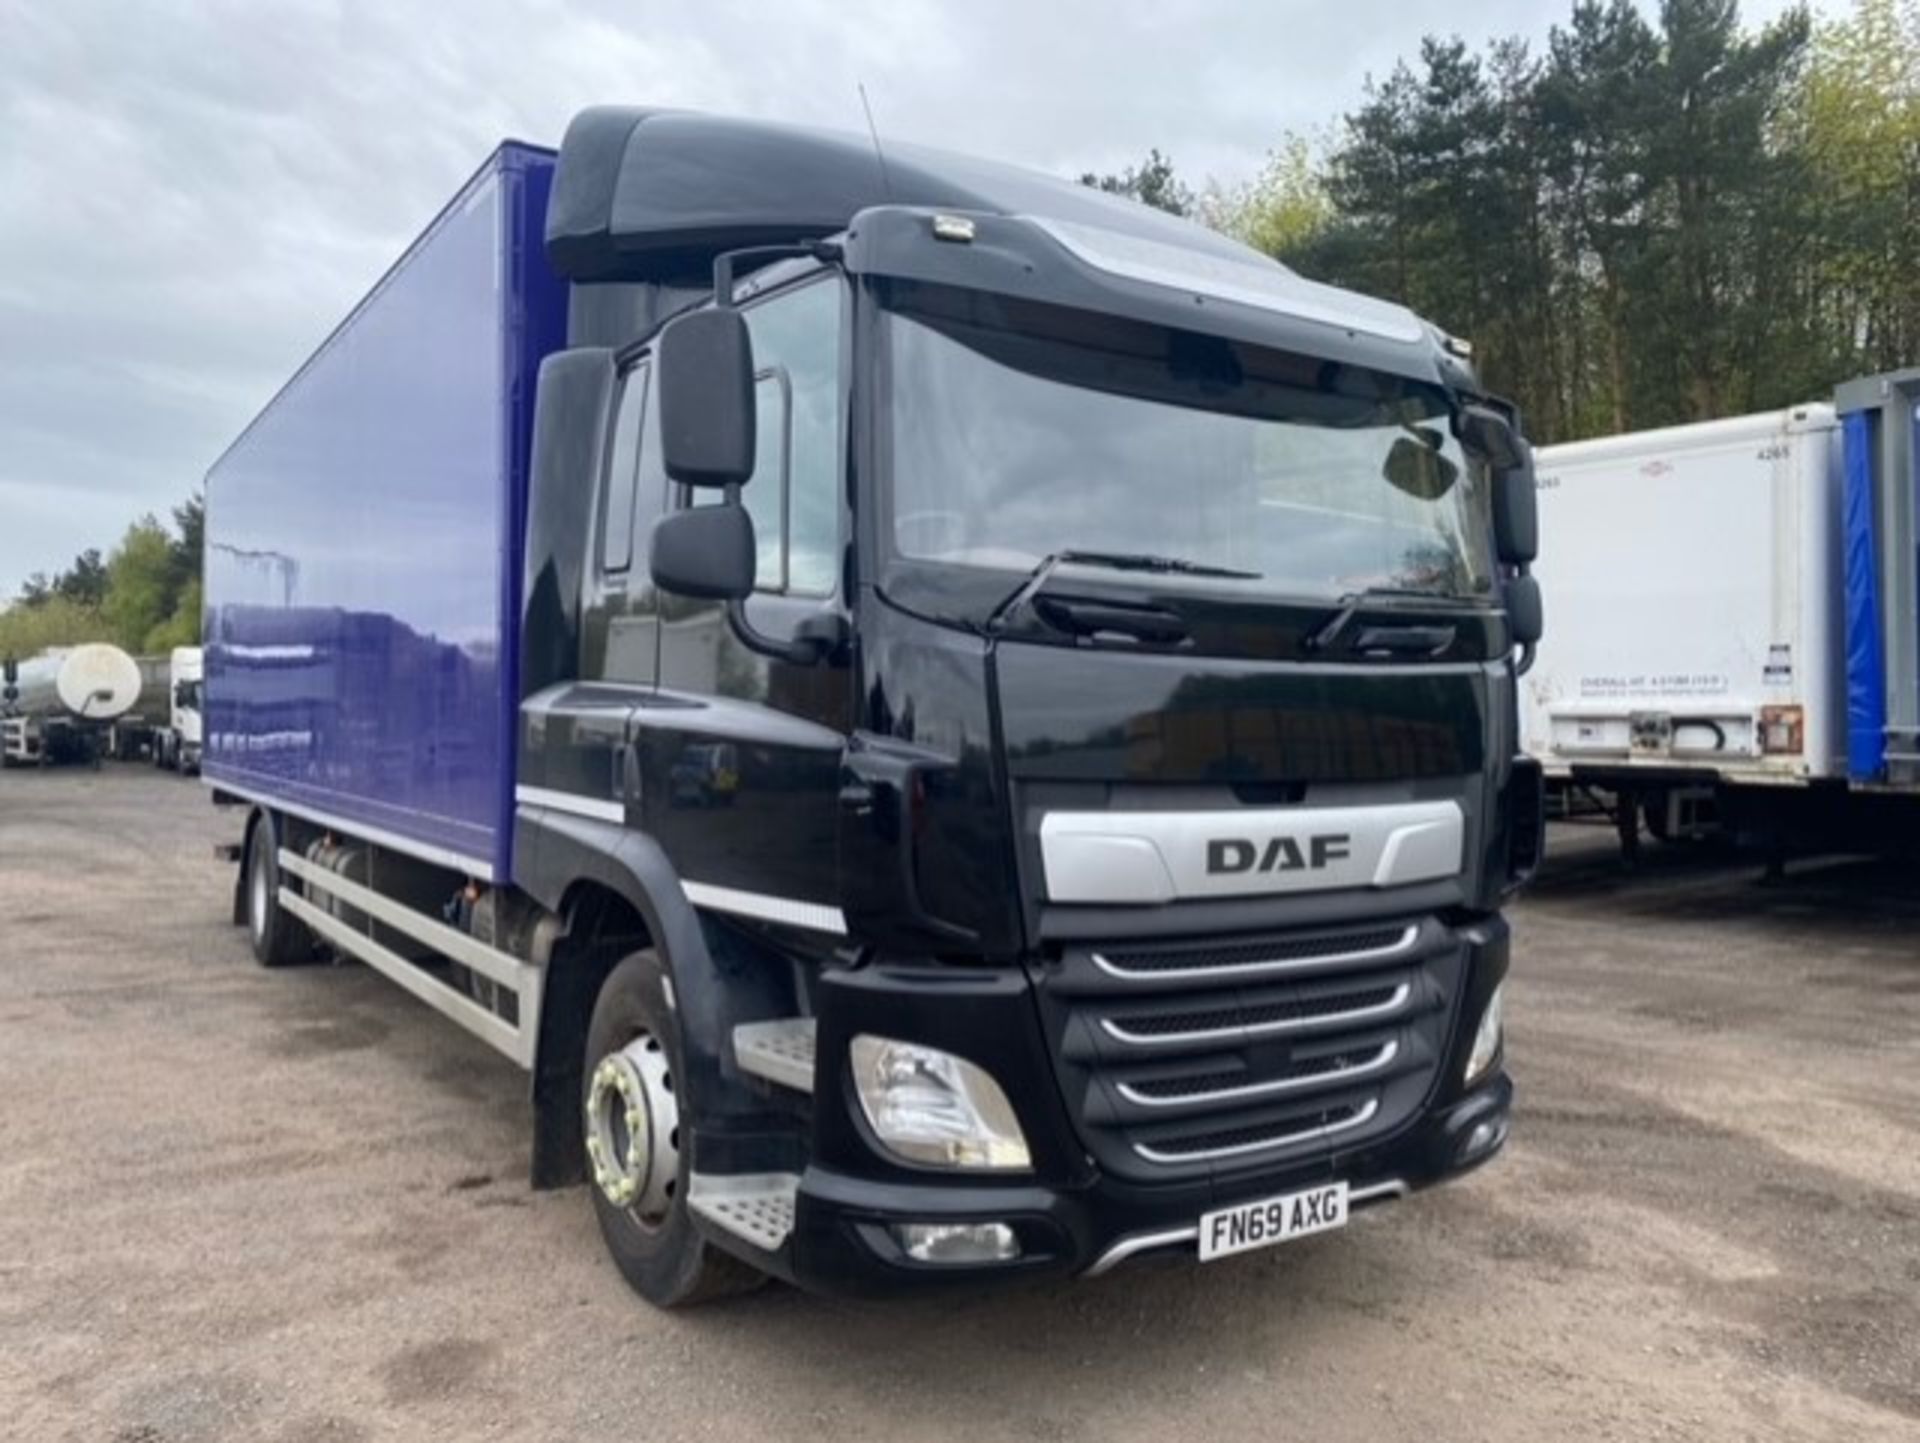 2019, DAF CF 260 FA (Ex-Fleet Owned & Maintained) - FN69 AXG (18 Ton Rigid Truck with Tail Lift) - Image 2 of 16